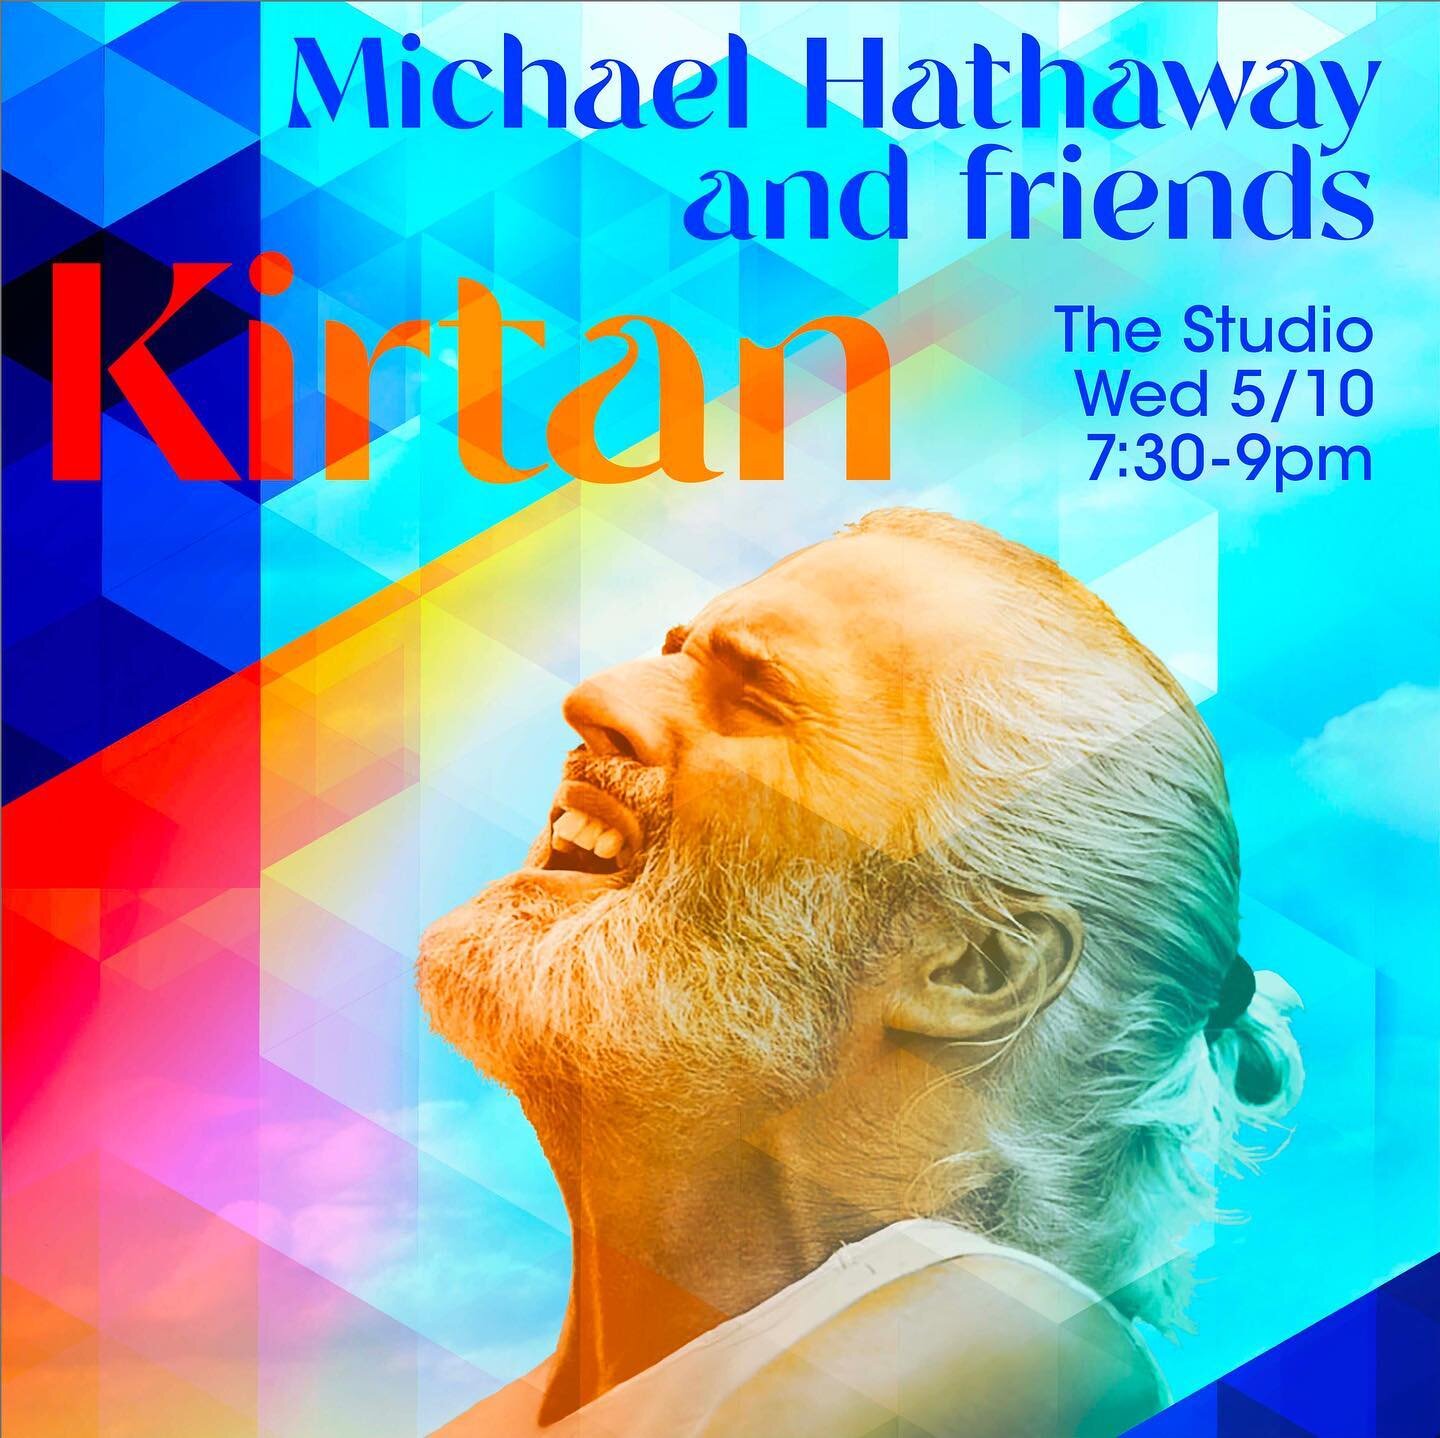 If you&rsquo;re near Reno, please join us Wednesday night for some kirtan! *Moran S t. location! (the studio has 2 locations)